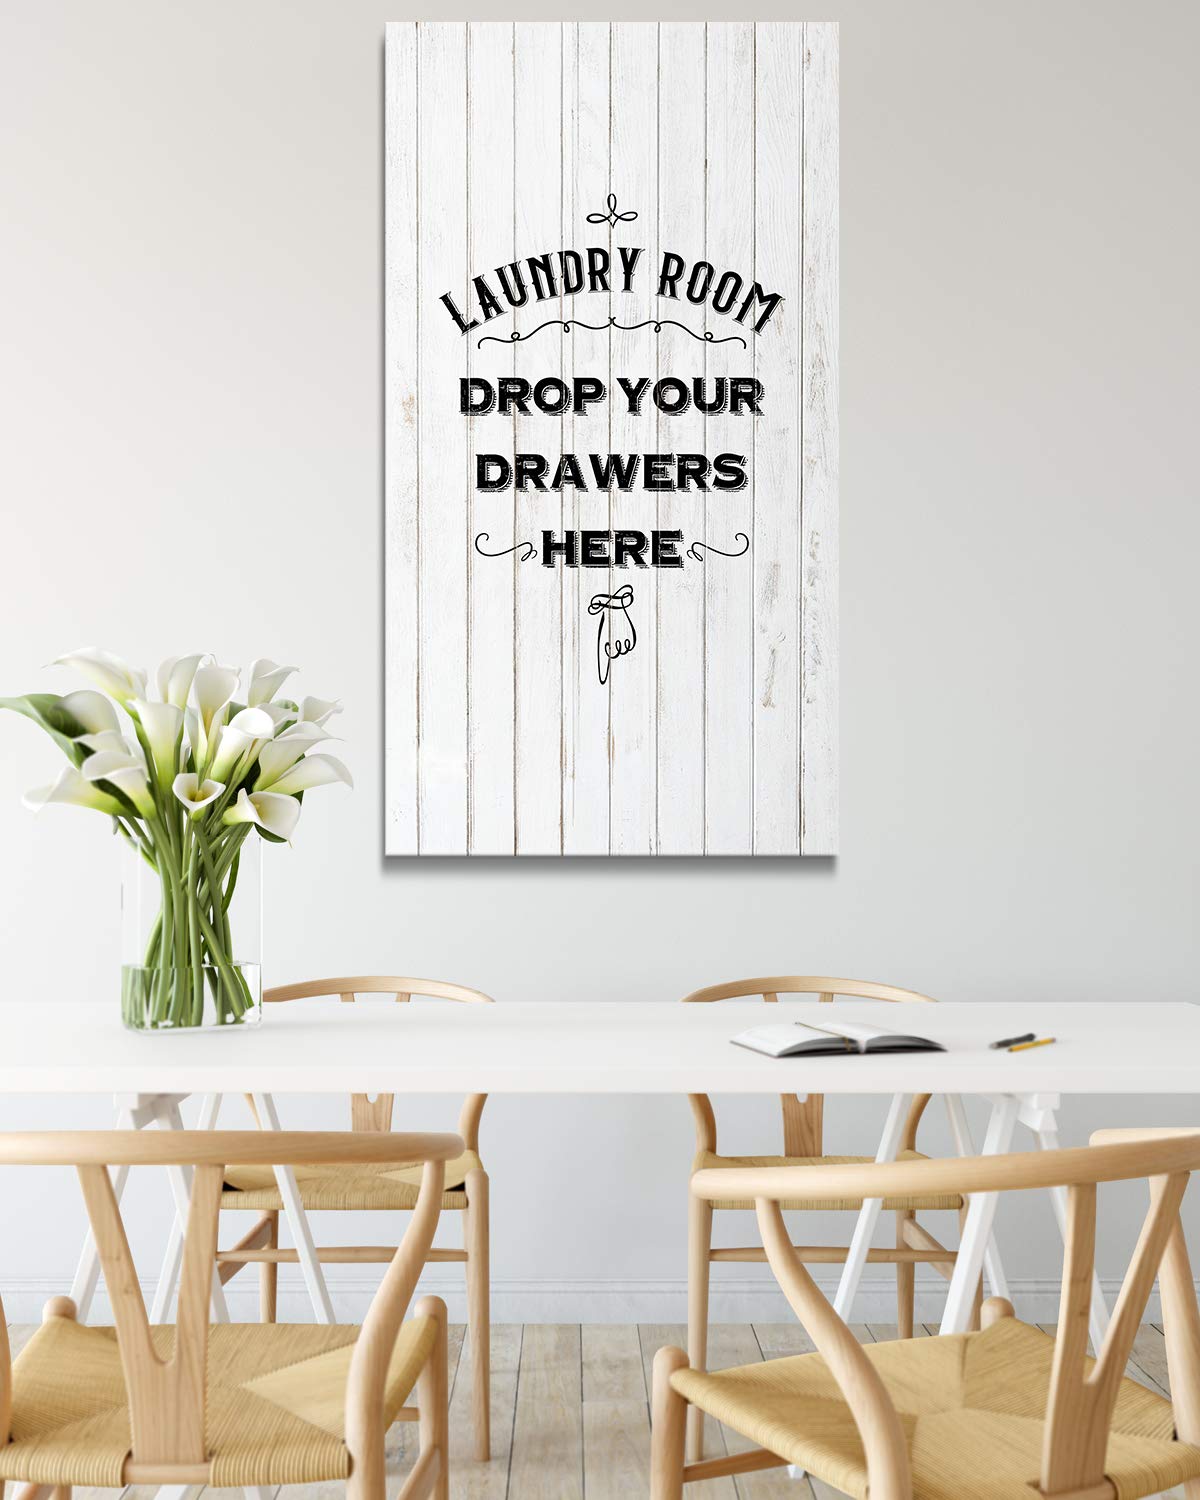 Laundry Room Drop Your Drawers Here - Wall Decor Art Canvas on a white woodgrain background - Ready to Hang - Great for a laundry room or kitchen